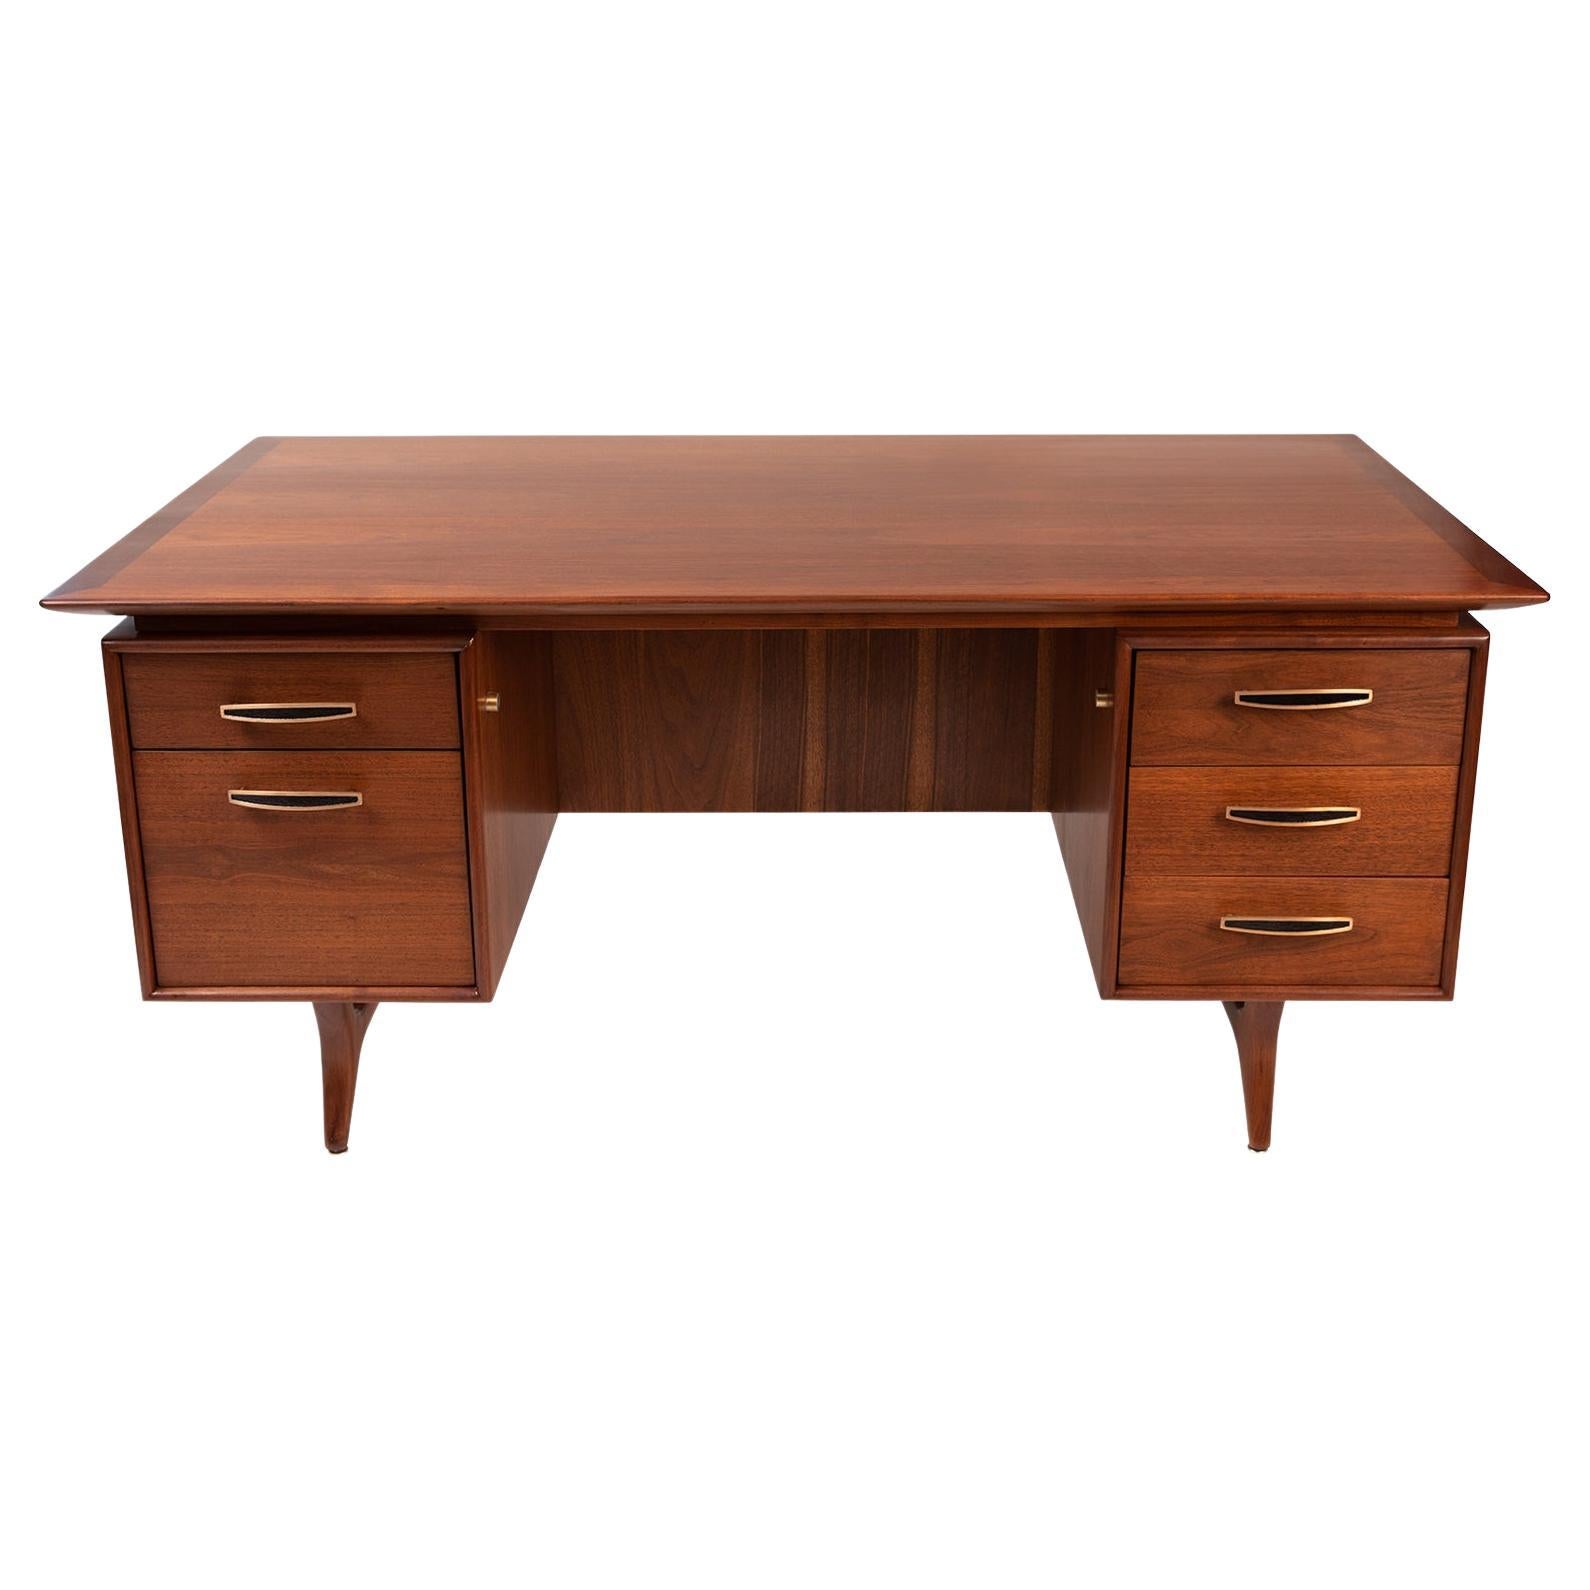 Monteverdi-Young walnut and brass desk circa late 1950s. This example has fabulous solid walnut legs, polished brass handles and lots of storage and work space. It has been newly and masterfully refinished.